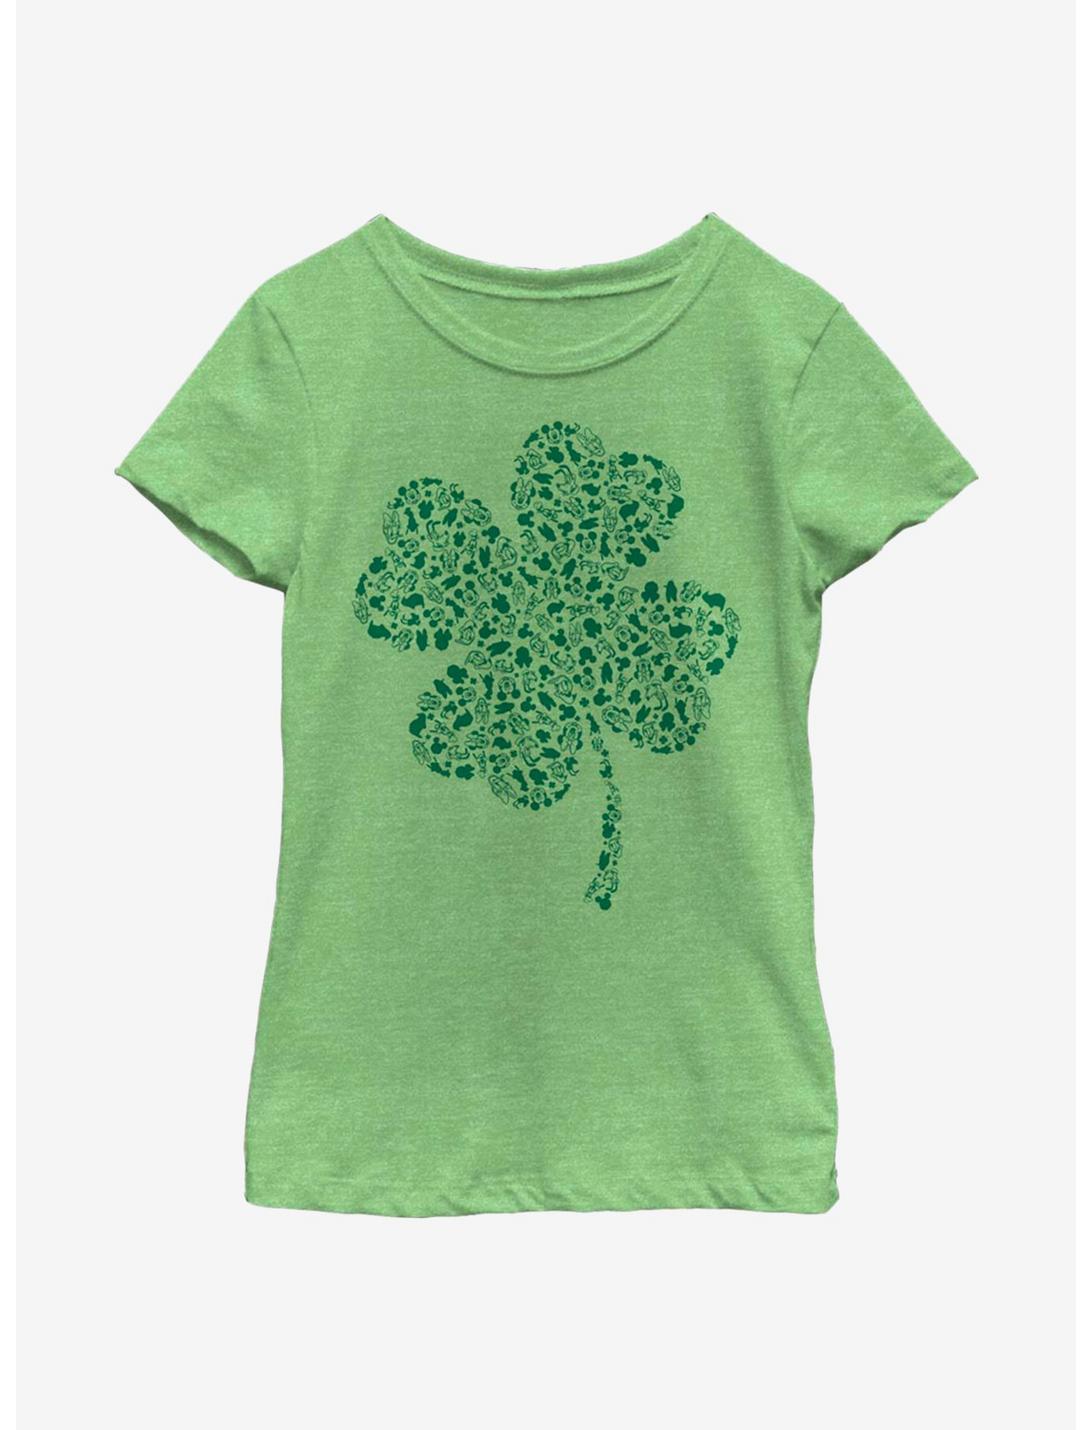 Disney Mickey Mouse Clover Fill Youth Girls T-Shirt, GRN APPLE, hi-res